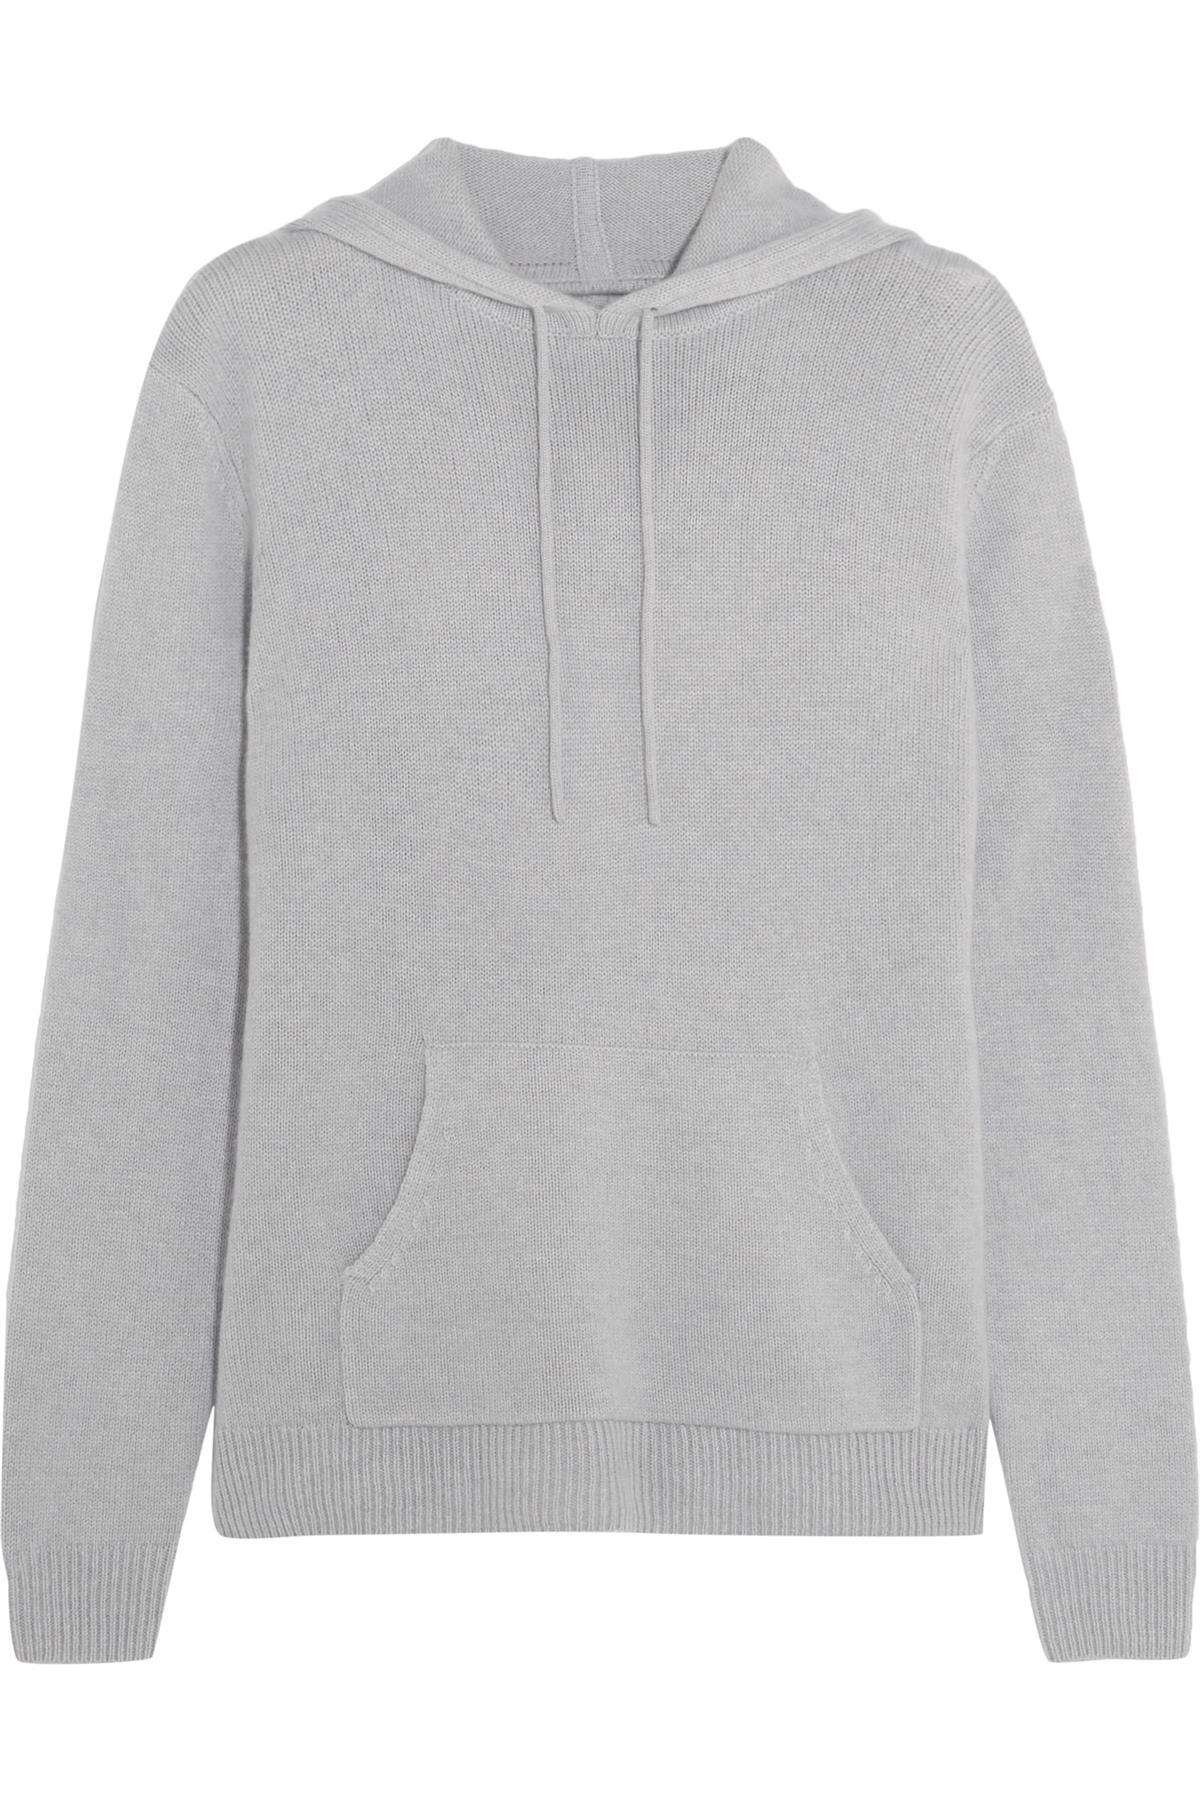 DION LEE CUTOUT CASHMERE HOODED SWEATER UK 8